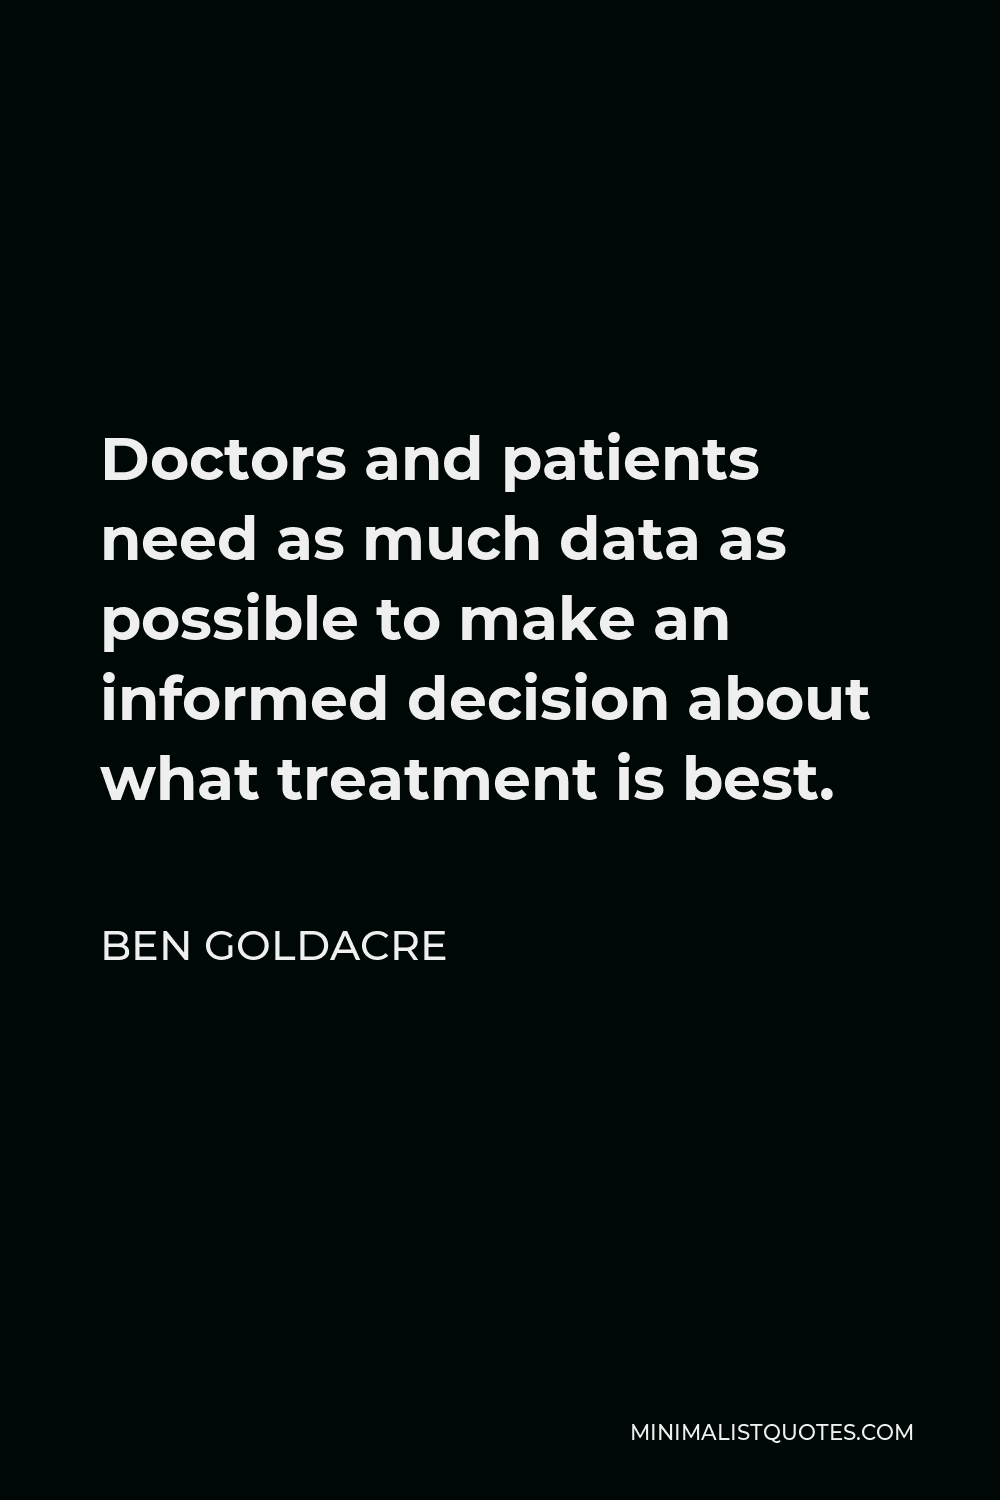 Ben Goldacre Quote - Doctors and patients need as much data as possible to make an informed decision about what treatment is best.